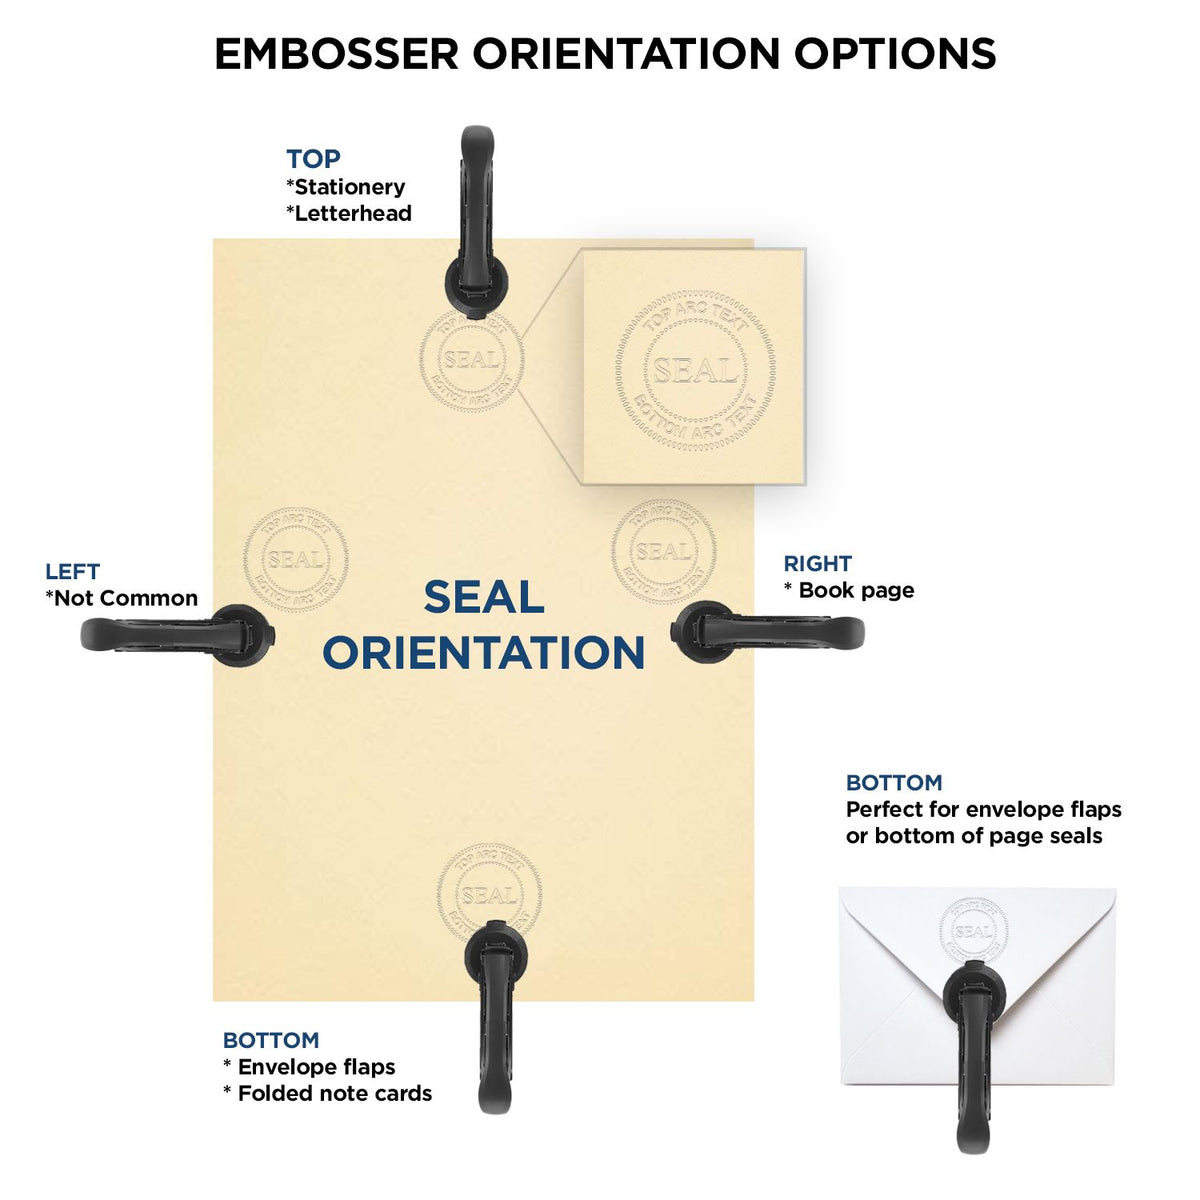 An infographic for the Gift Alaska Landscape Architect Seal showing embosser orientation, this is showing examples of a top, bottom, right and left insert.